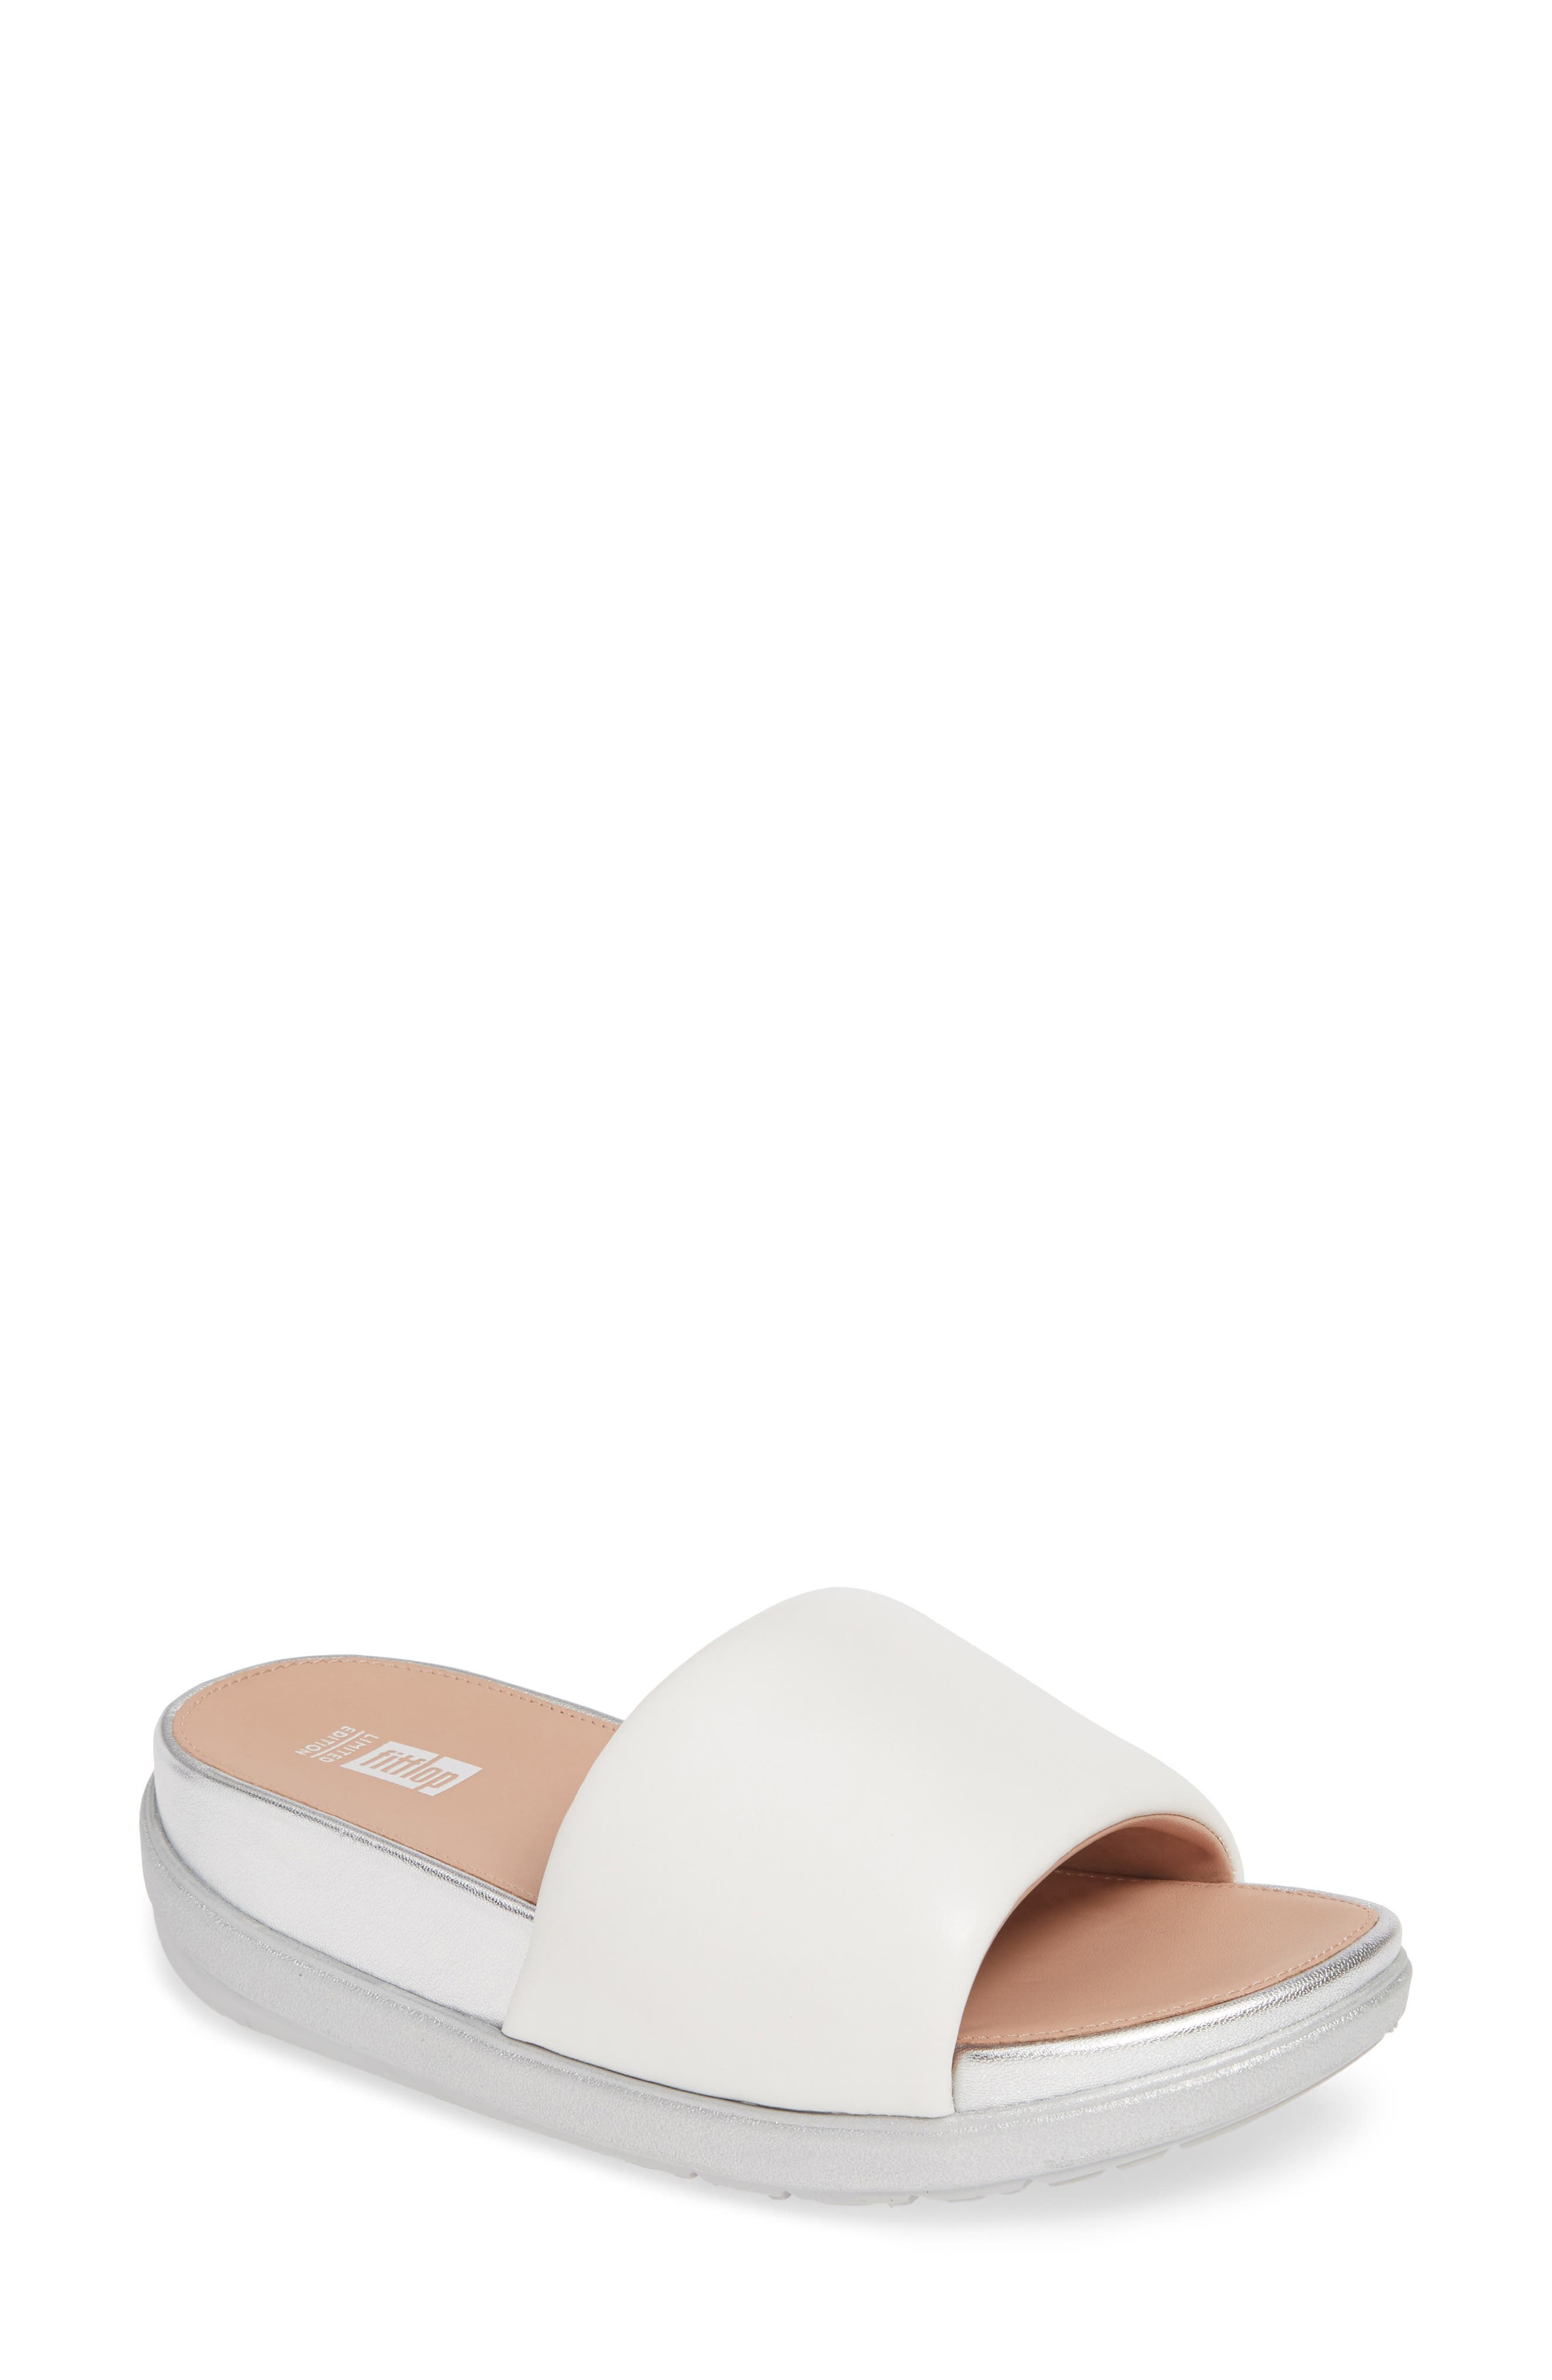 loosh luxe leather slides